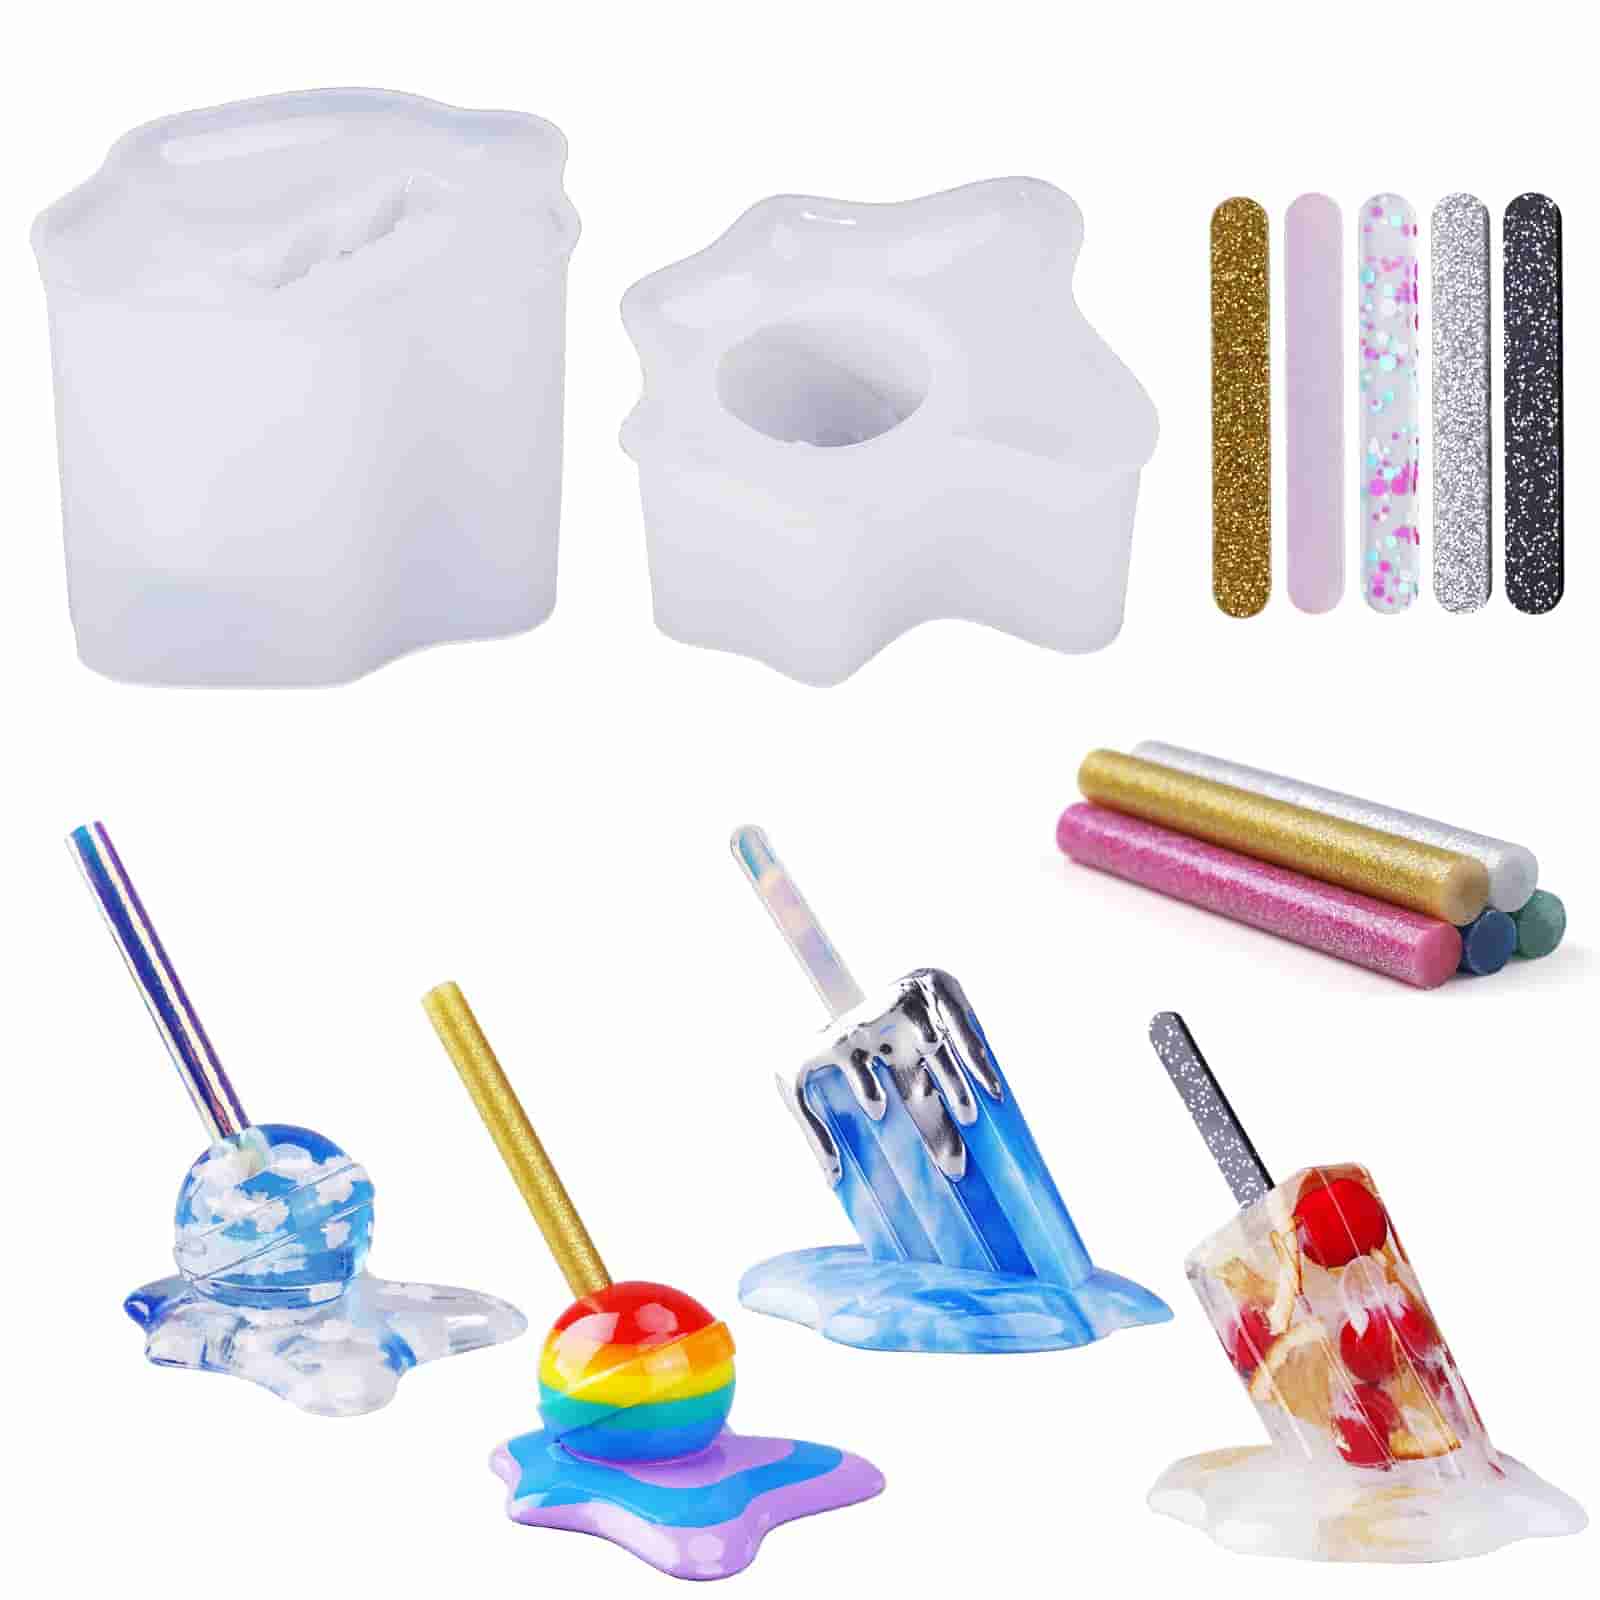 Small Jar Resin Molds Silicone DIY Crystal Epoxy Resin Mold For